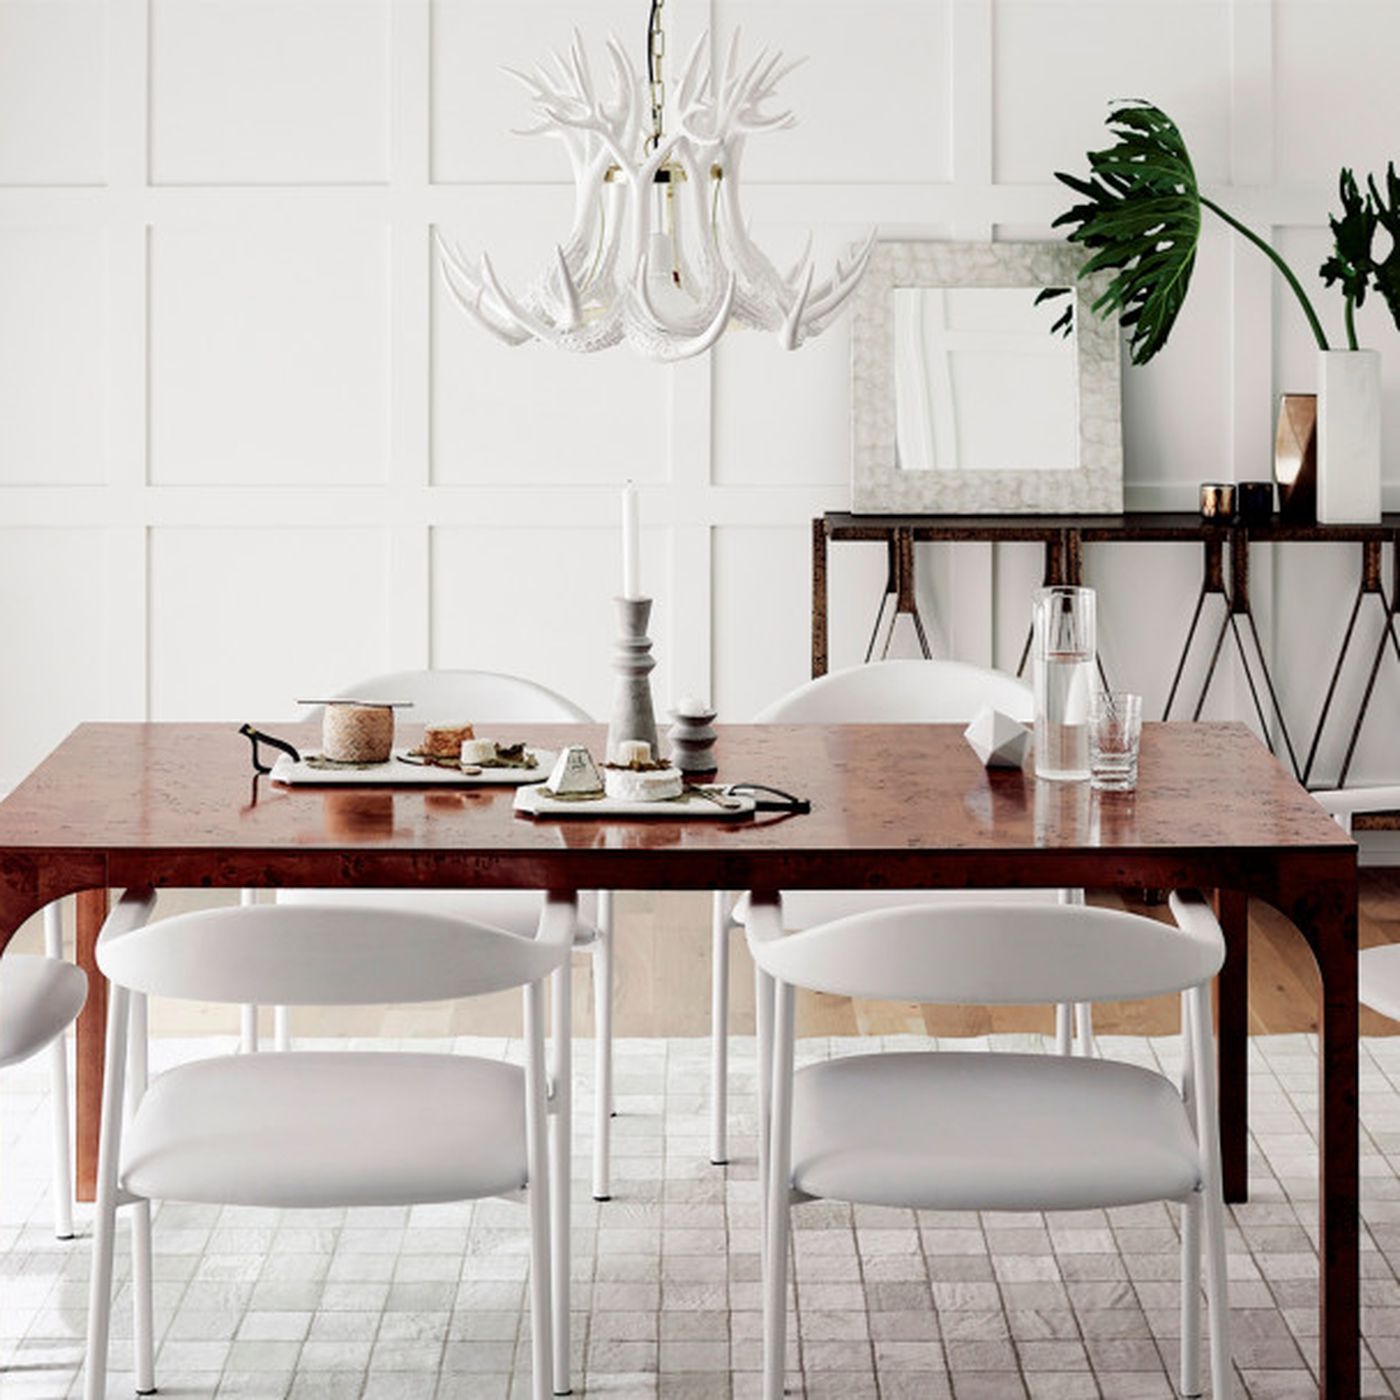 Top Tips for Buy a Dining Table with Stools Underneath